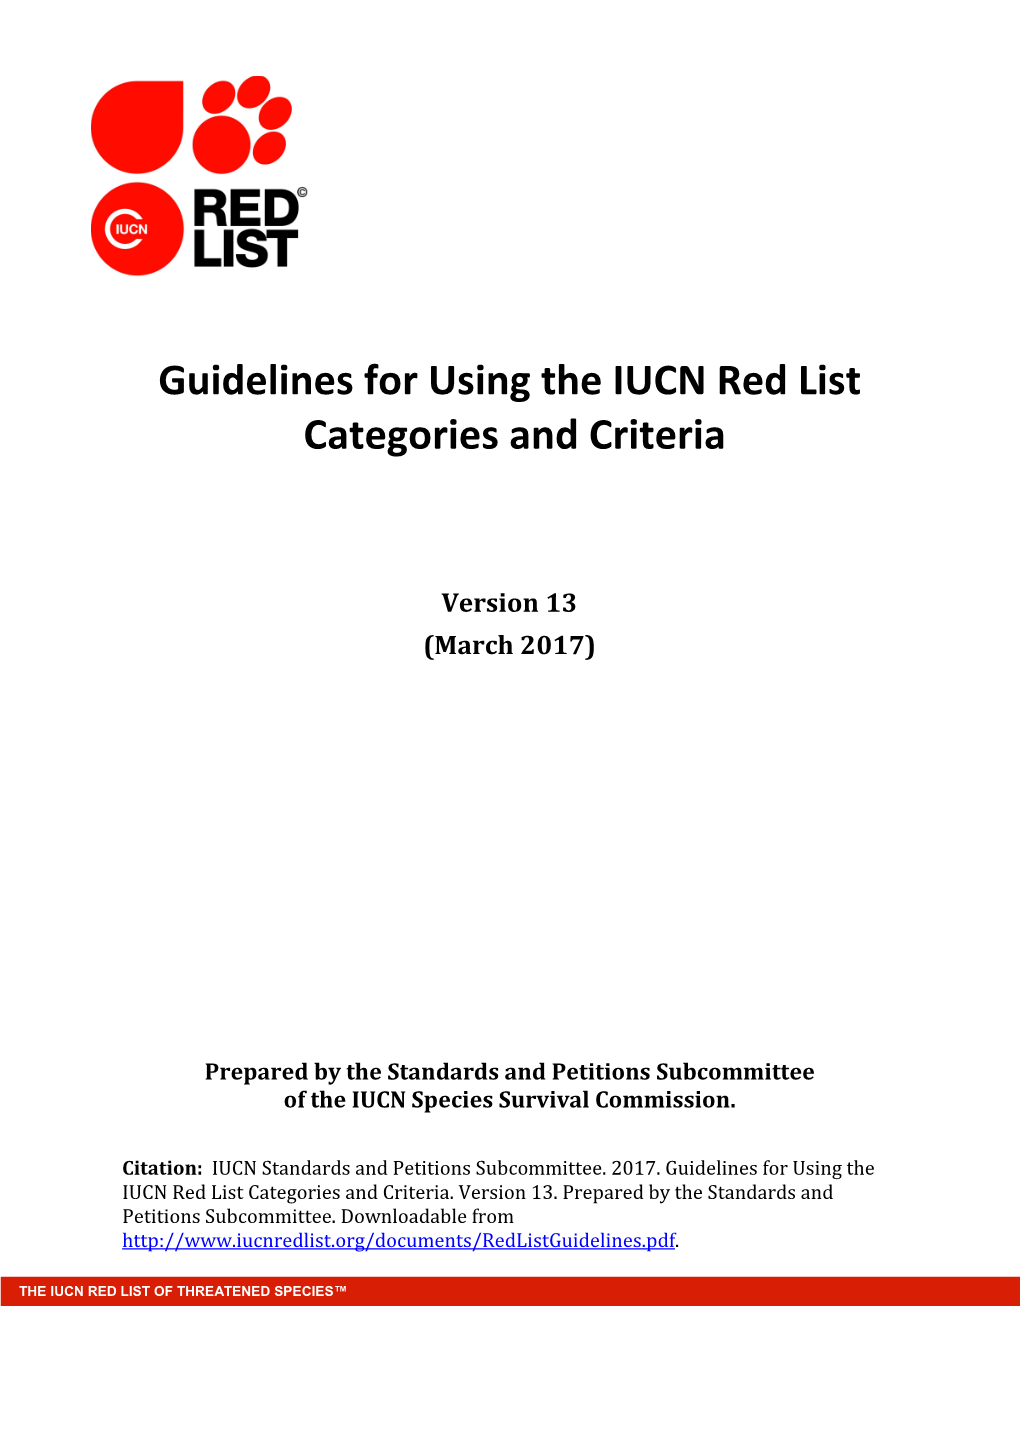 IUCN Red List Guidelines